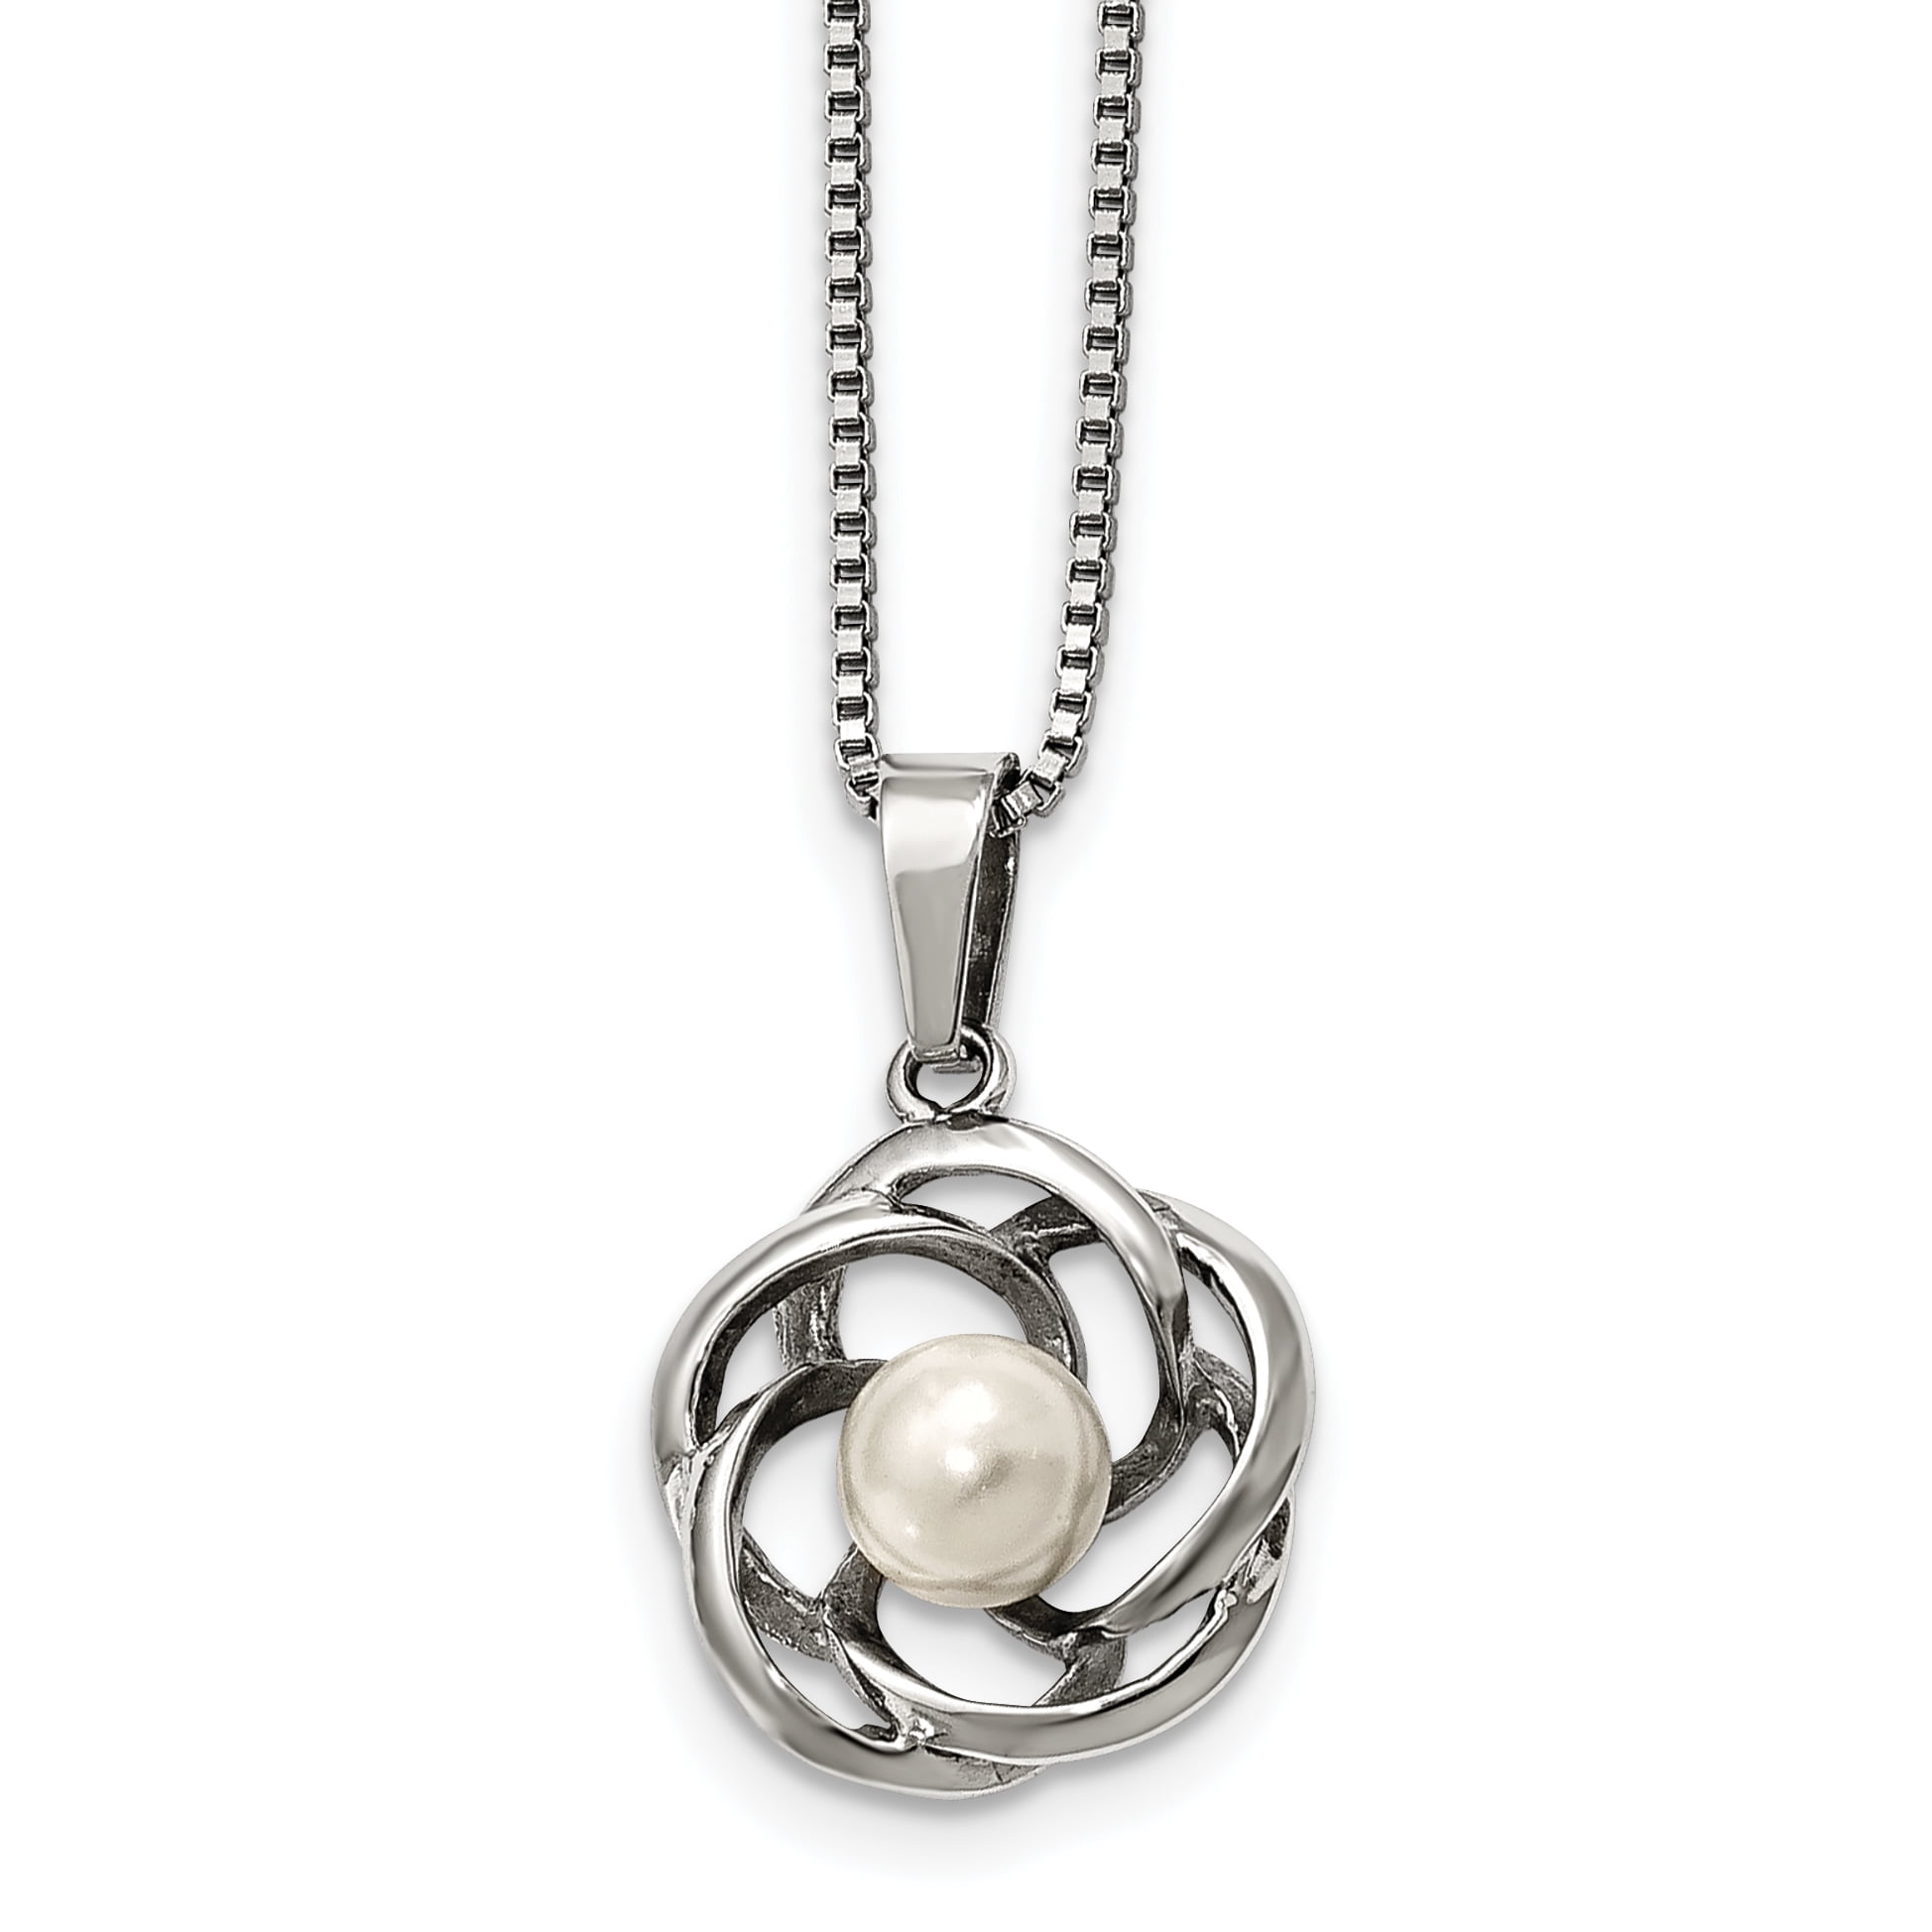 Saris and Things - Stainless Steel Polished Freshwater Cultured Pearl